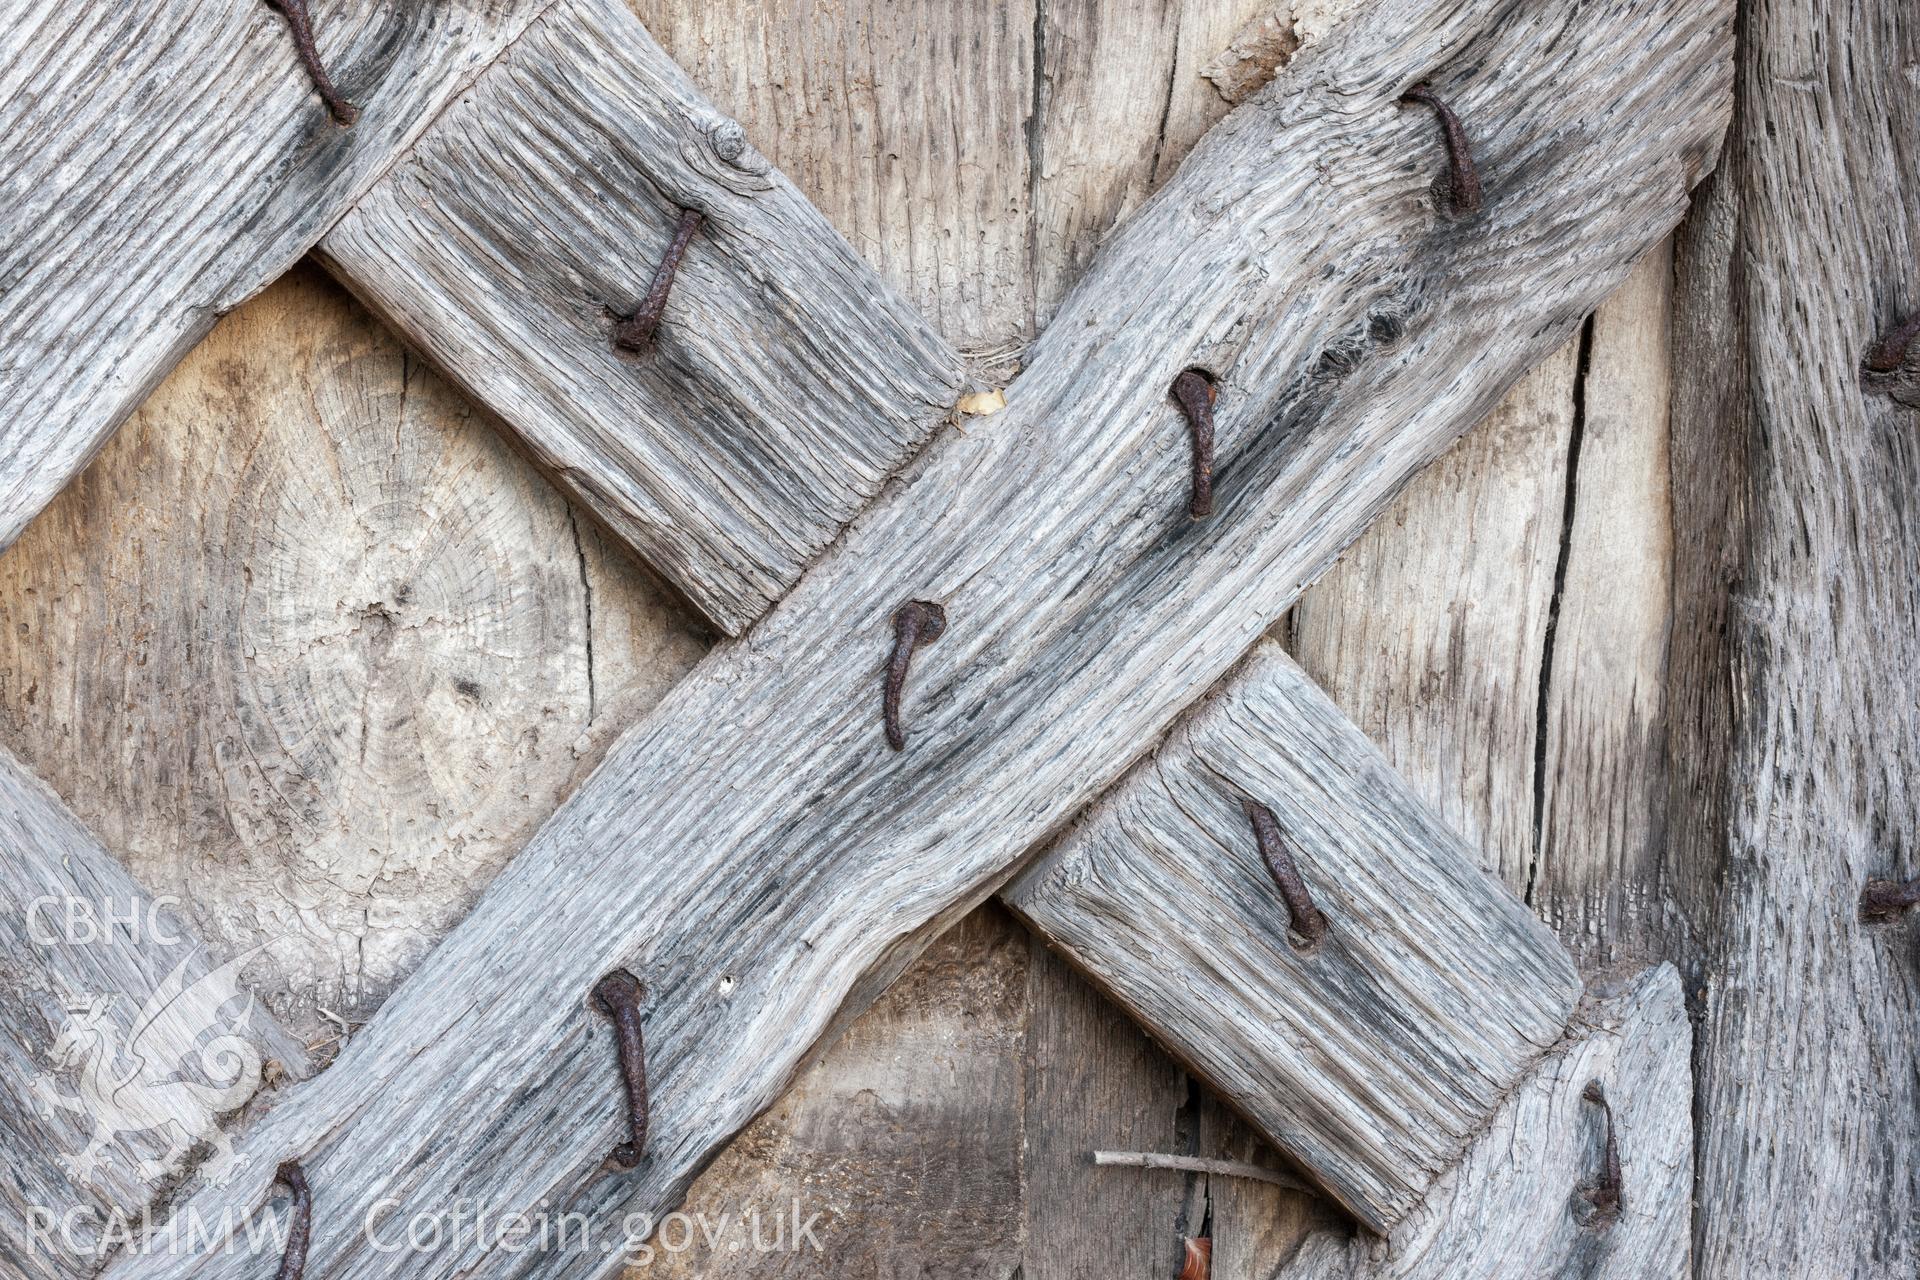 Gate detail showing construction and clenched nails (Circa C13th)